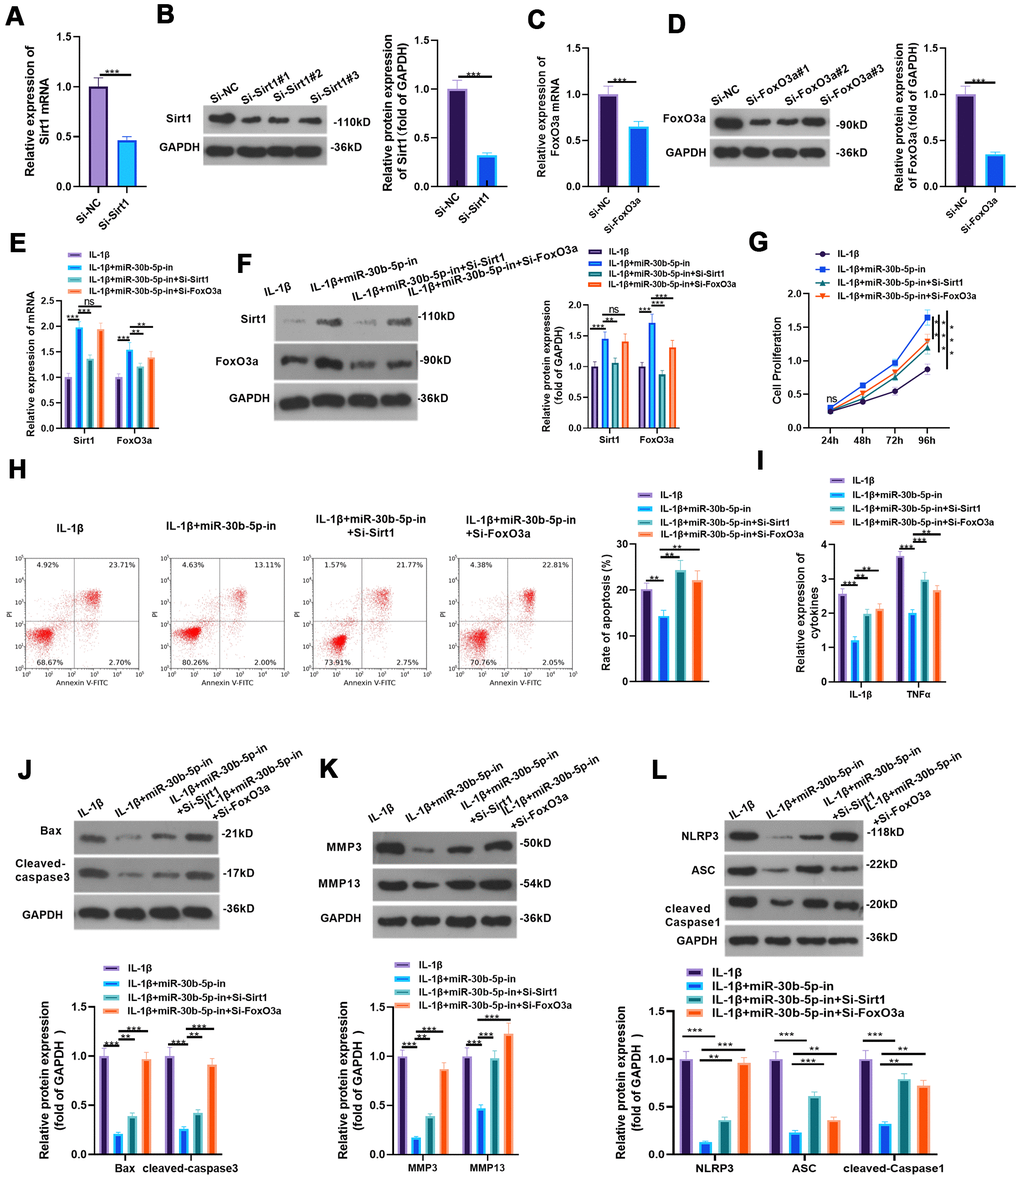 Inhibiting SIRT1/FoxO3a curbed the protection of miR-30b-5p knockdown on IL-1β-mediated HC-A cells. (A–D) si-SIRT1 and si-FoxO3a were transfected into IL-1β-treated HC-A cells and their transfection effects were verified by RT-qPCR and WB. (E, F) The SIRT1/FoxO3a expression in IL-1β-treated HC-A cells was checked by RT-qPCR and WB, respectively. (G, H) The CCK8 method and flow cytometry were utilized to gauge cell viability and apoptosis. (I) The levels of IL-1β and TNFα were monitored by RT-qPCR. (J–L) The expression of Bax, cleaved Caspase3, MMP3, MMP13 and NLRP3-ASC-cleaved Caspase1 was examined by WB. nsP>0.05, **P